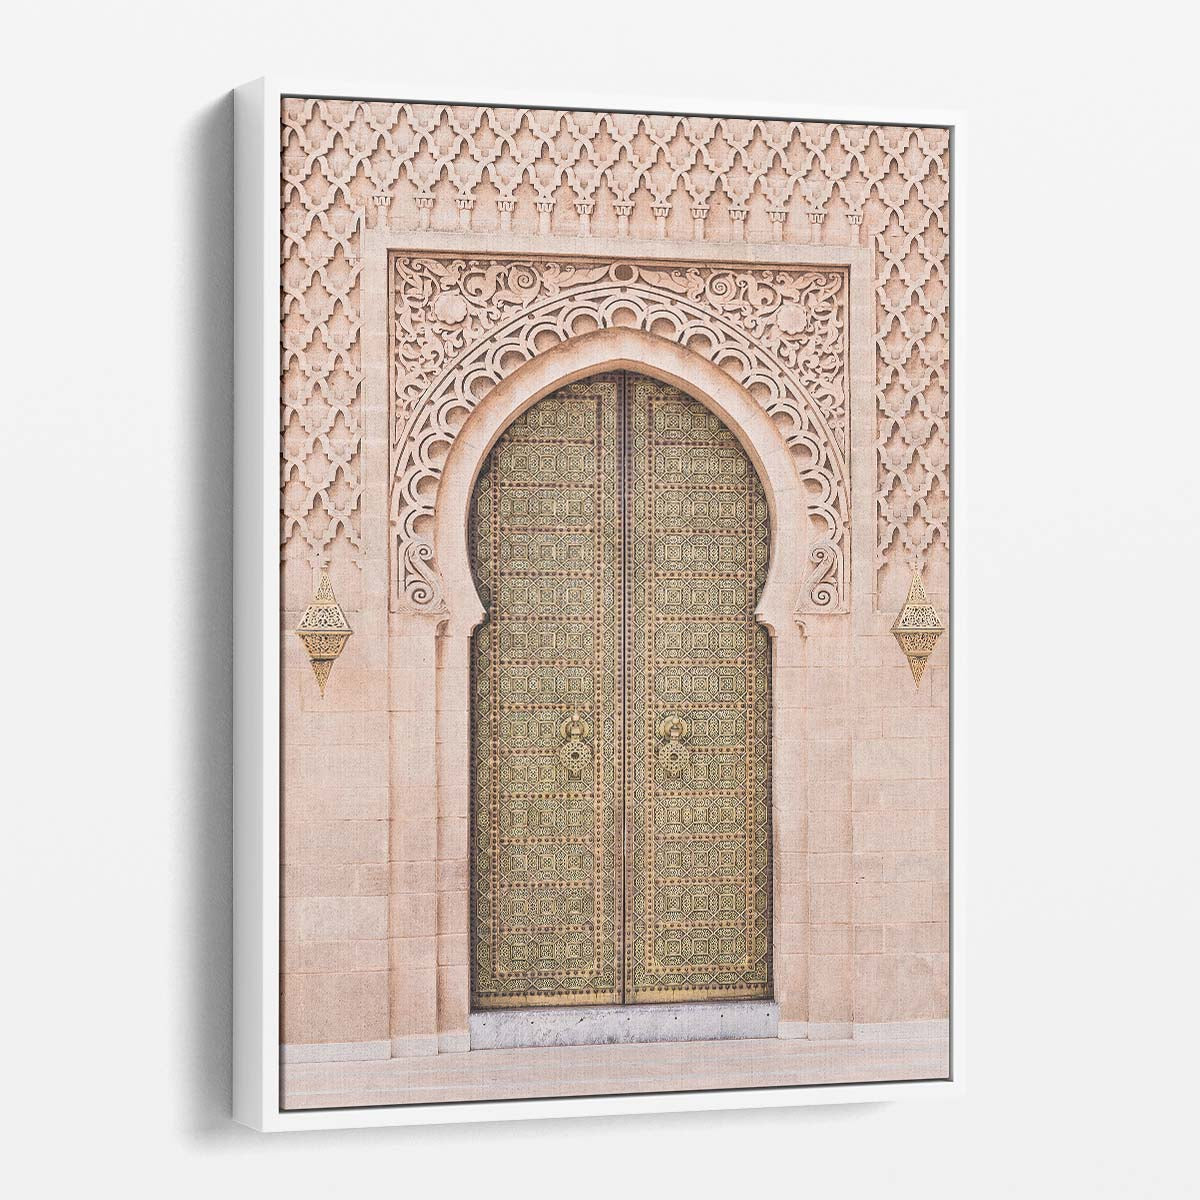 Moroccan Door Boho Architectural Photography - Kathrin Pienaar by Luxuriance Designs, made in USA